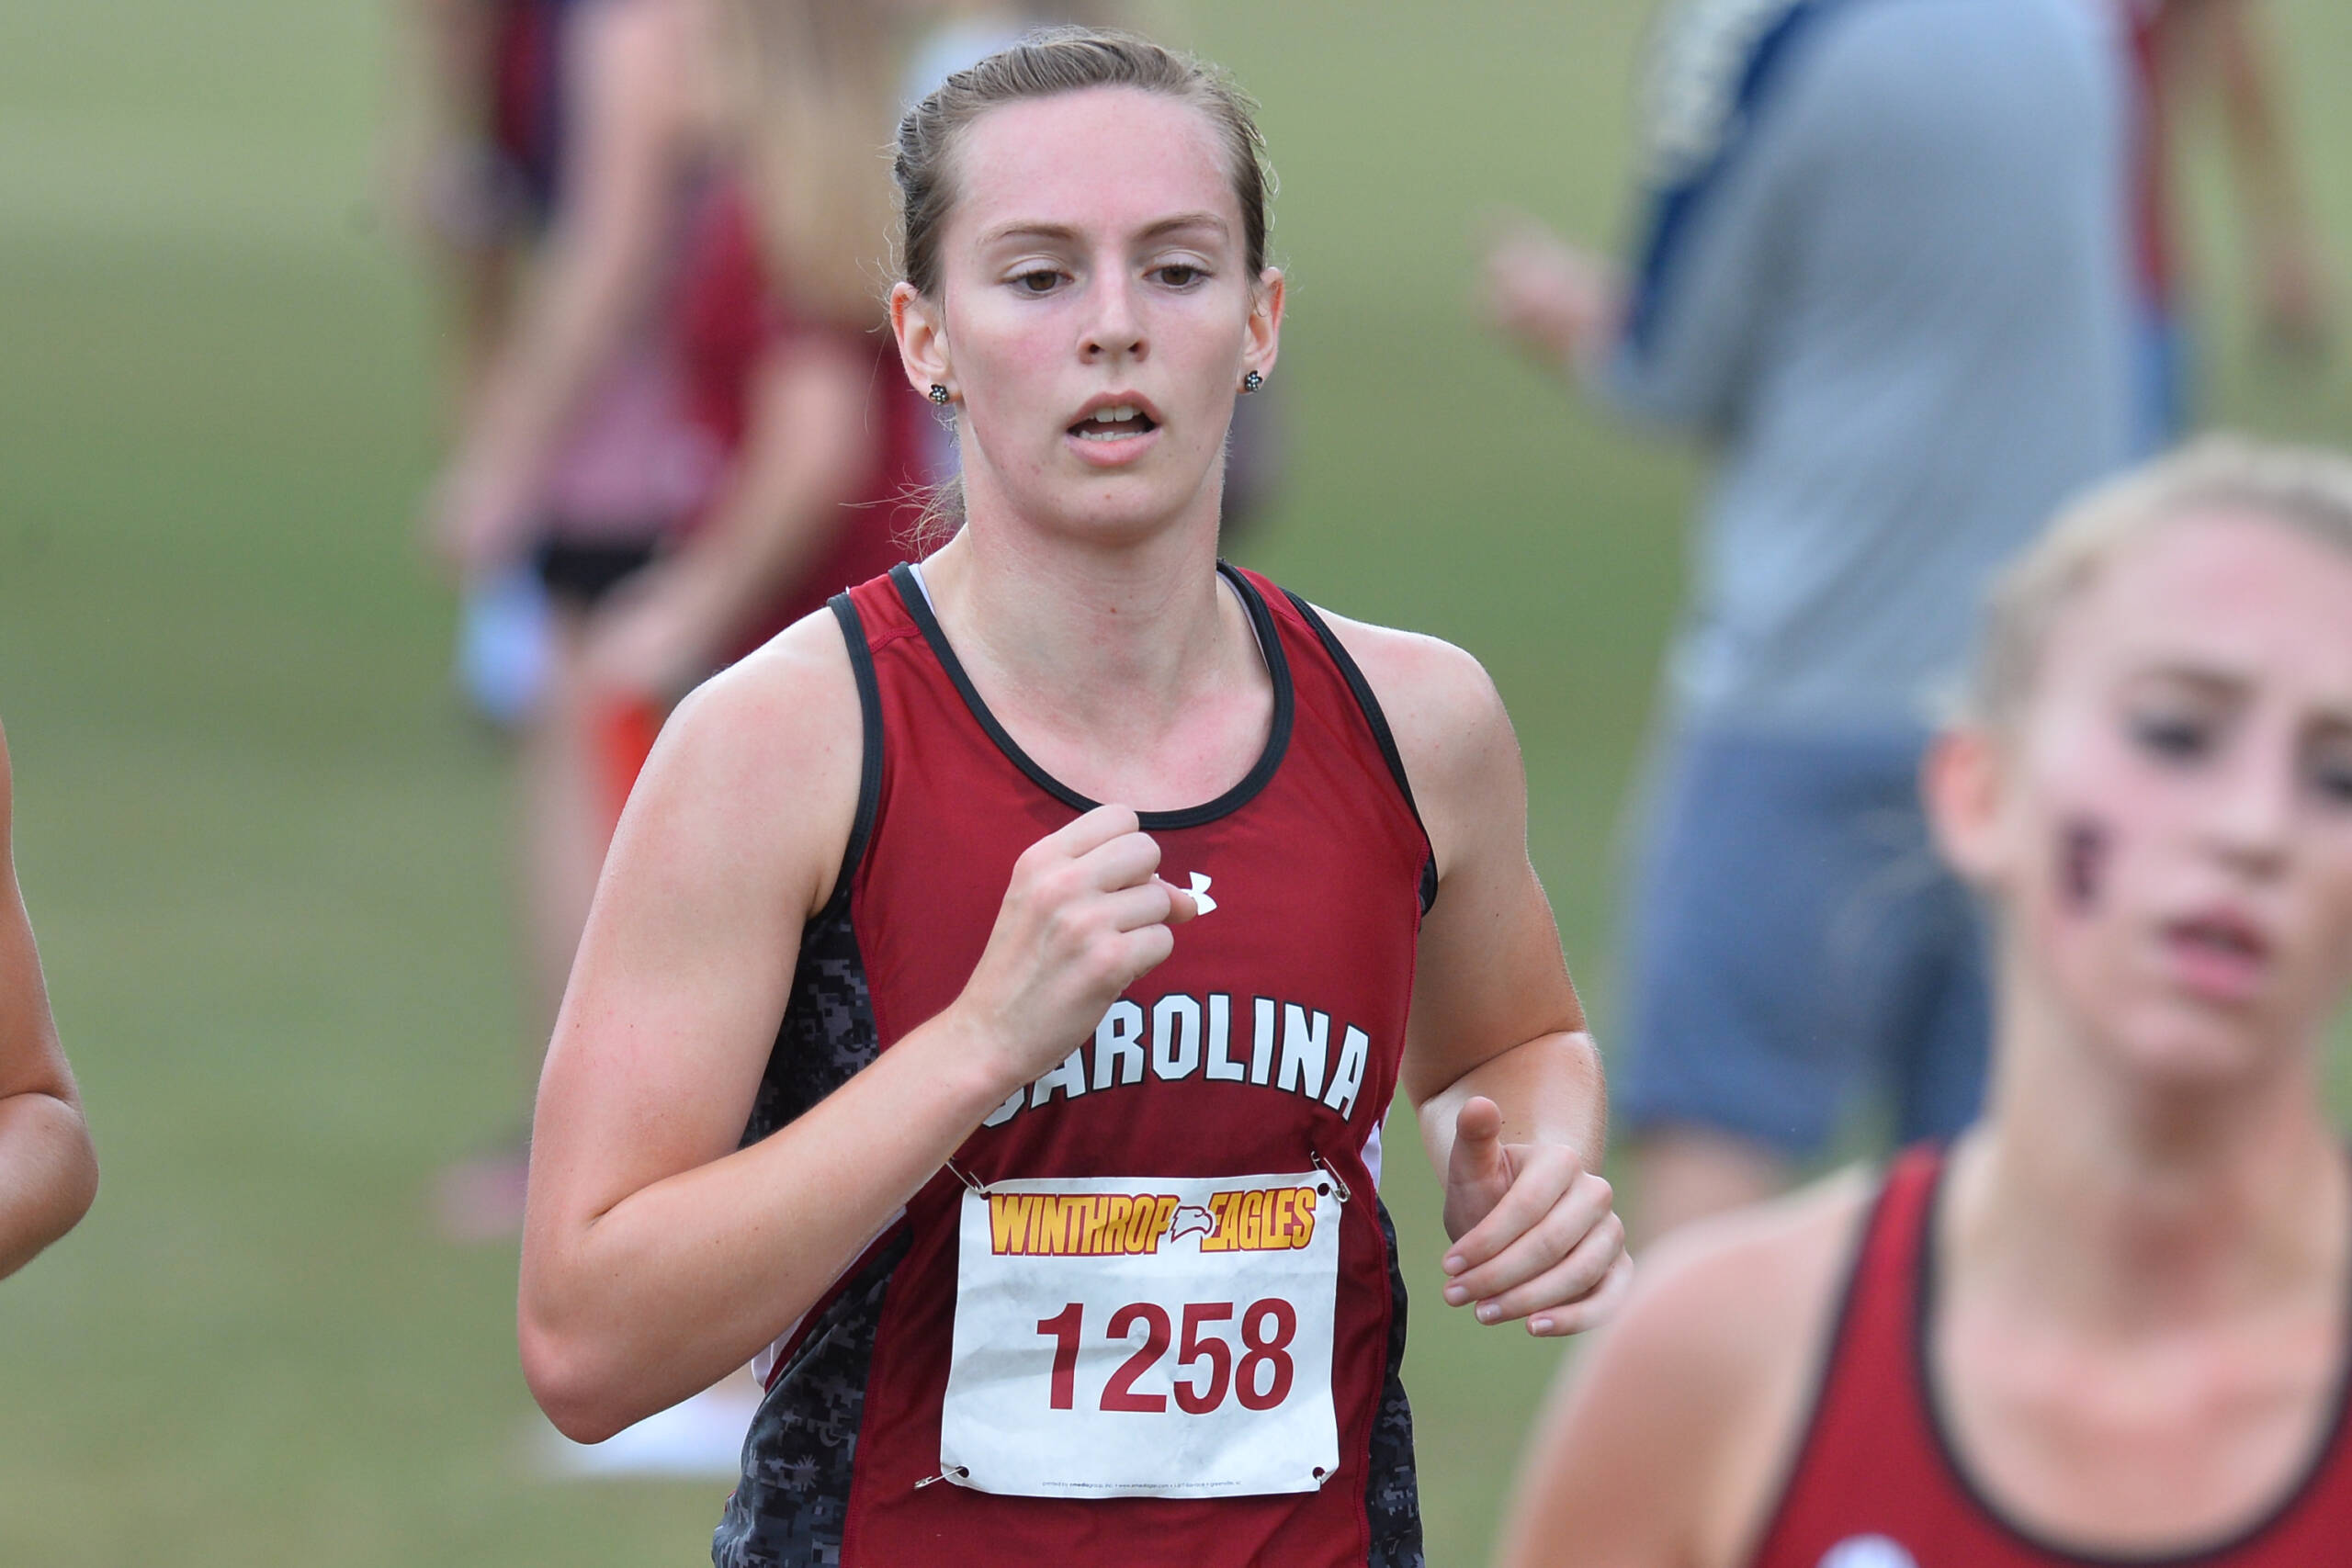 Gamecocks Take 13th in Packed Crimson Classic Field